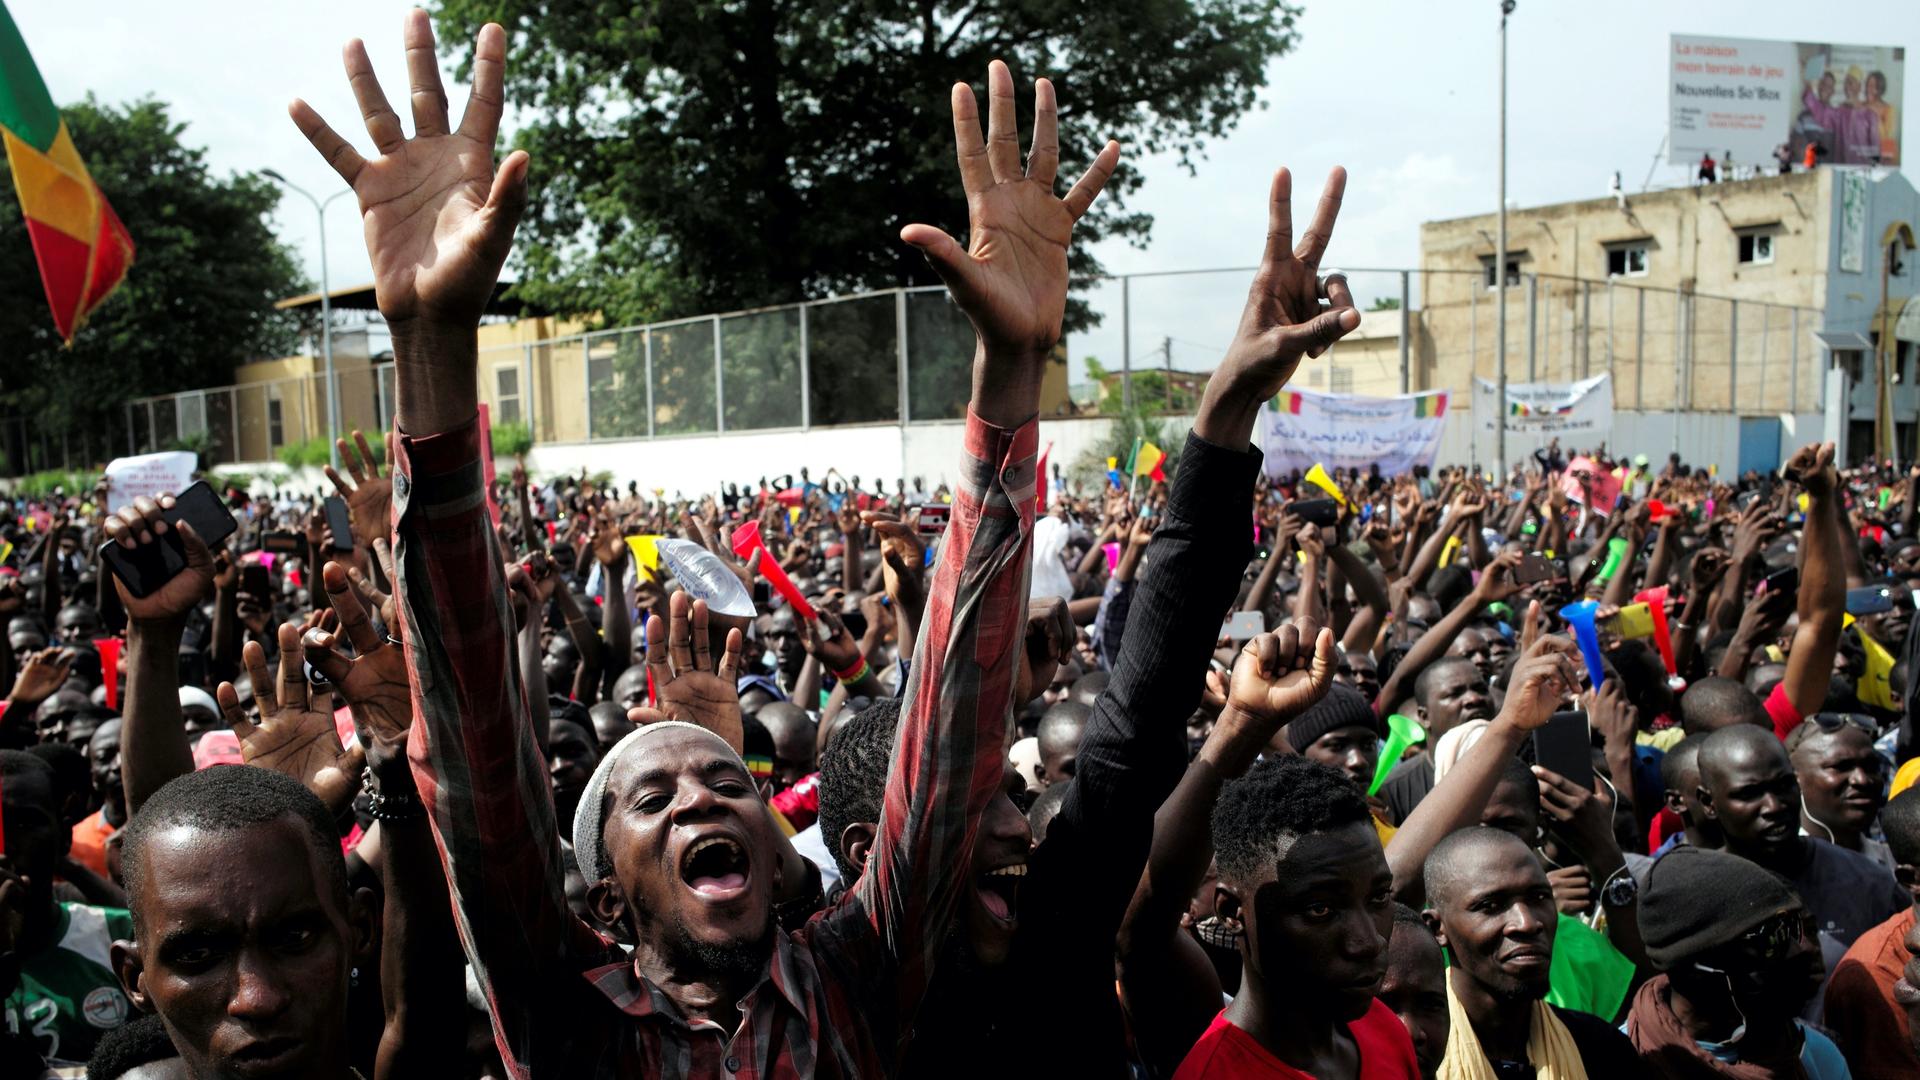 A huge crowd of protesters in Mali with one person raises his arms high in the air